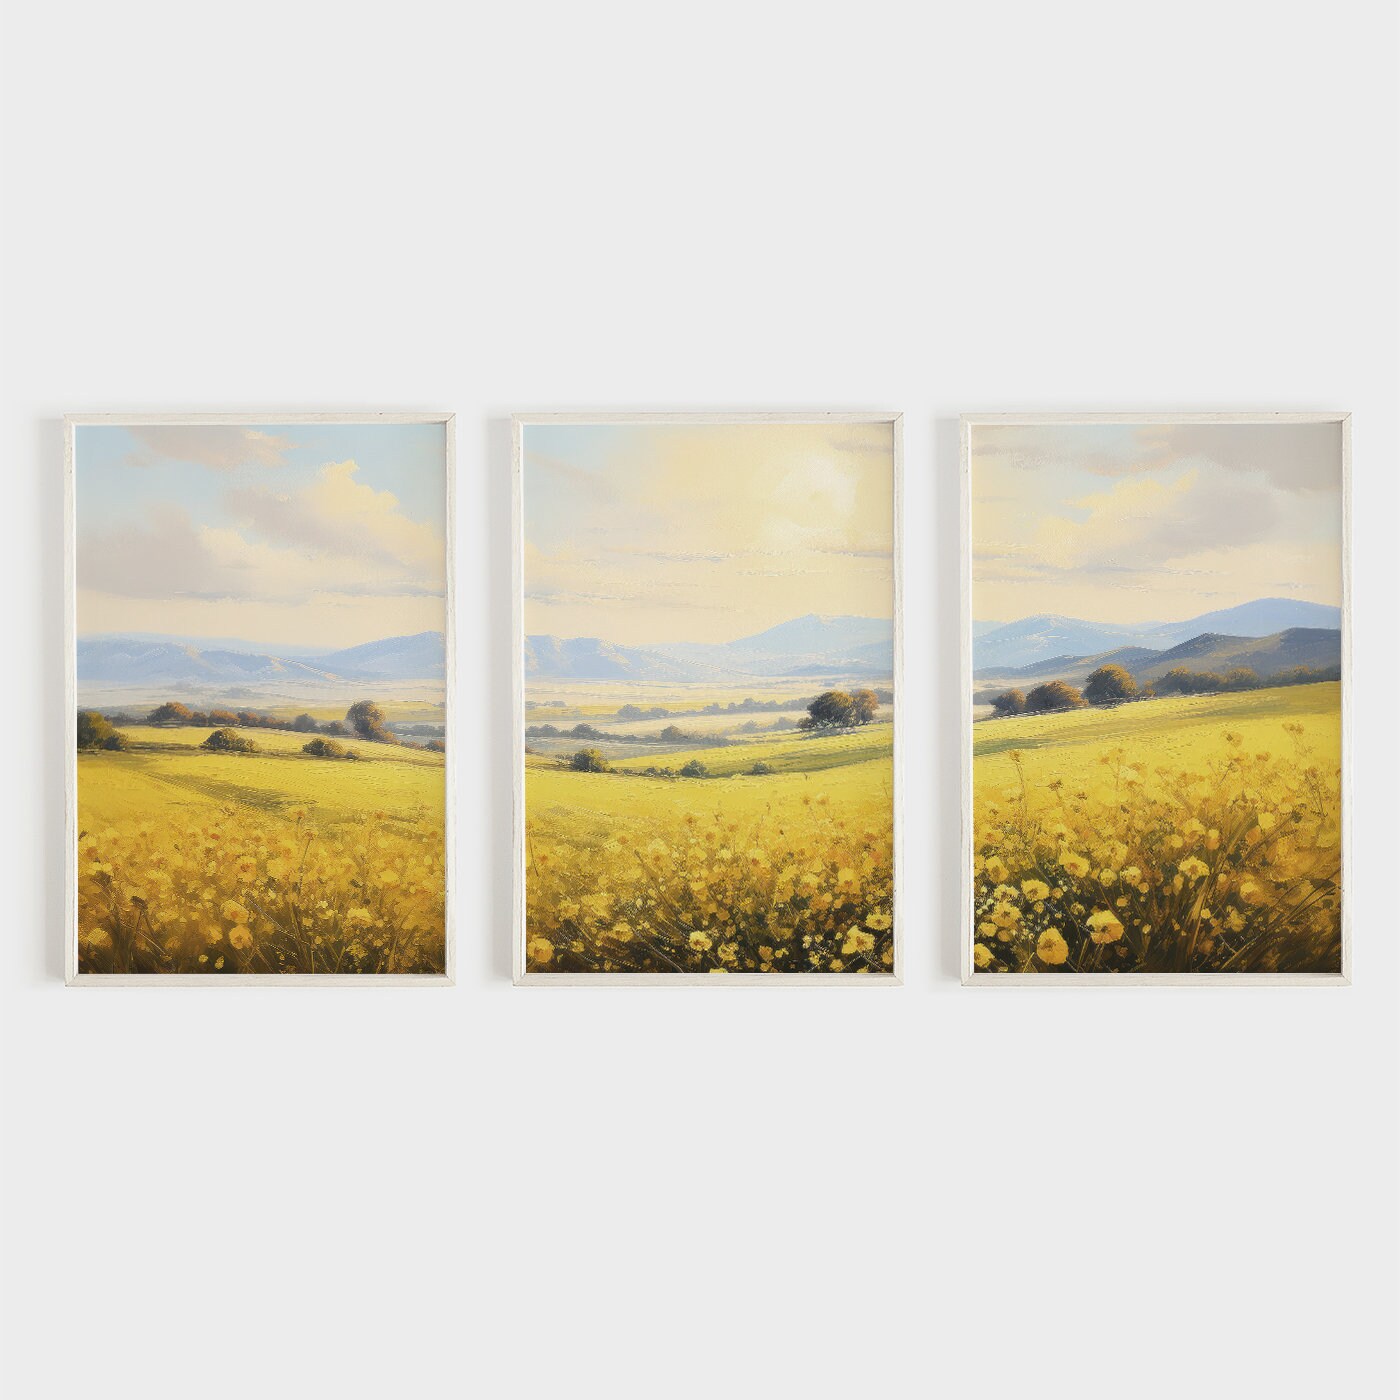 Canola Flower Wall Art, Countryside Landscape Art, Floral Home Decor, Rapeseed Field Print, Yellow Flowers Painting, Digital Printable Art